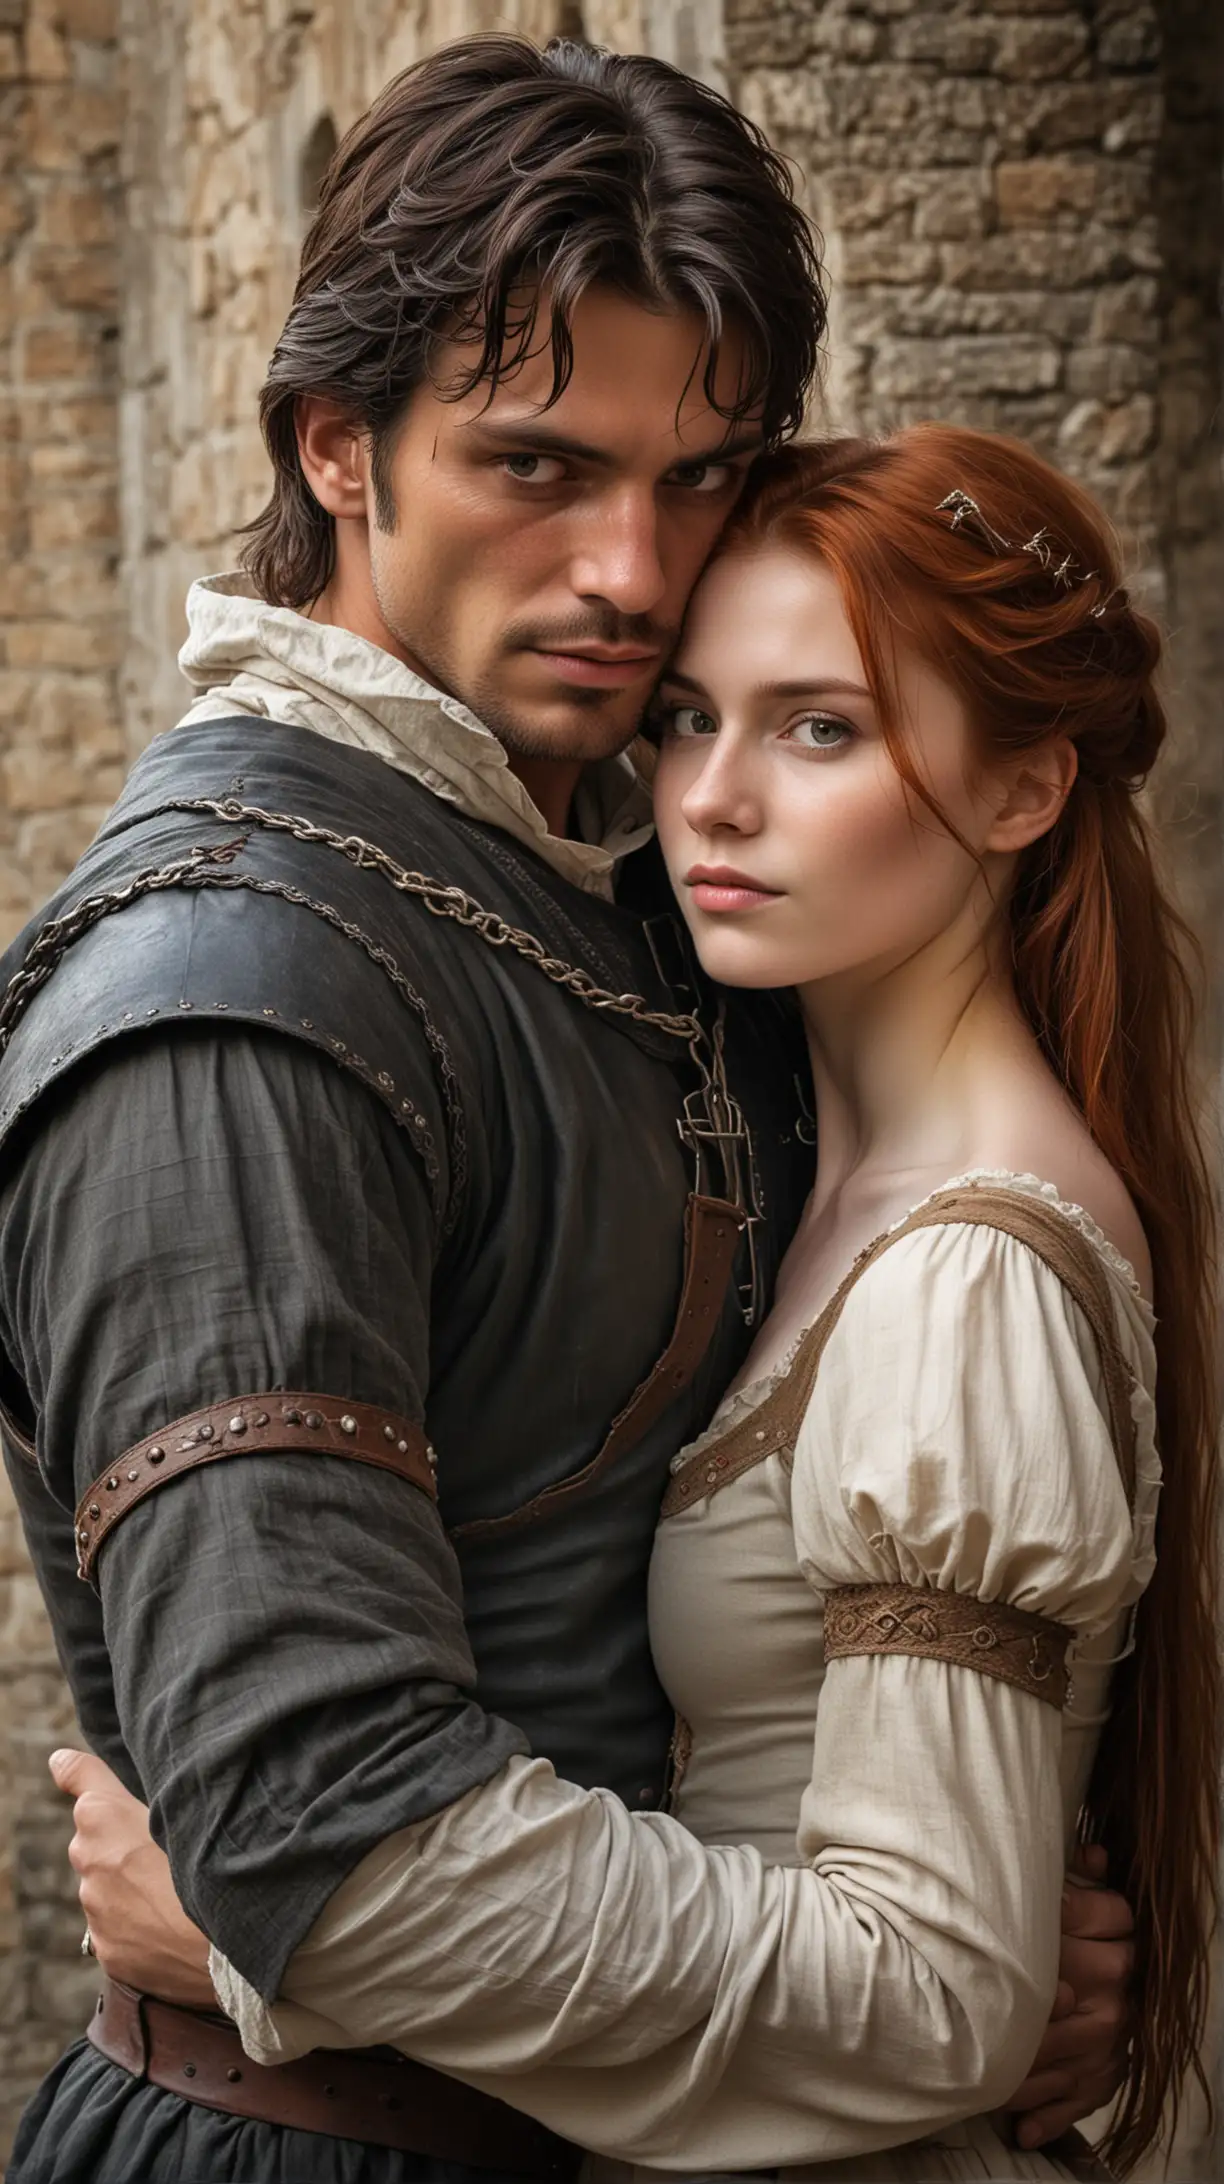 Medieval Father Embracing RedHaired Daughter in a Serene Moment